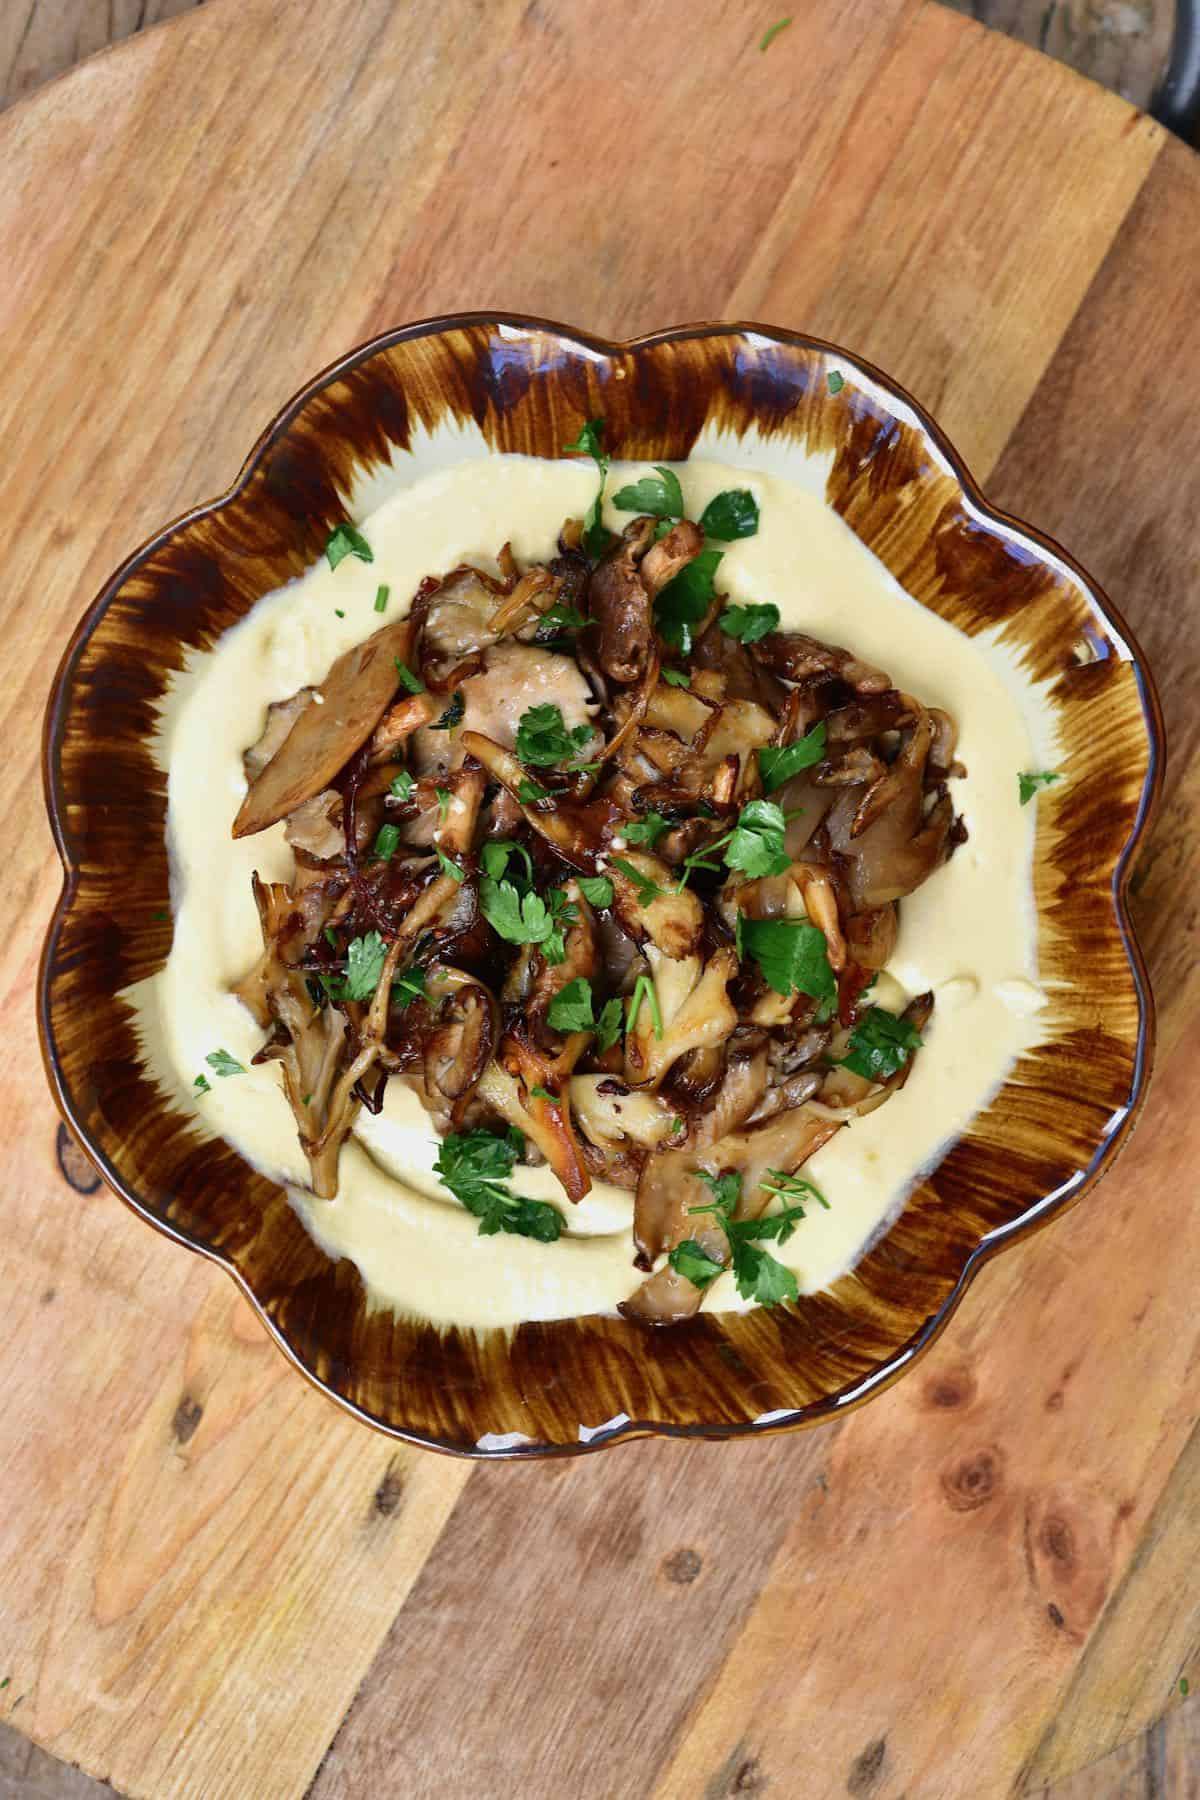 Cooked mushrooms served over hummus